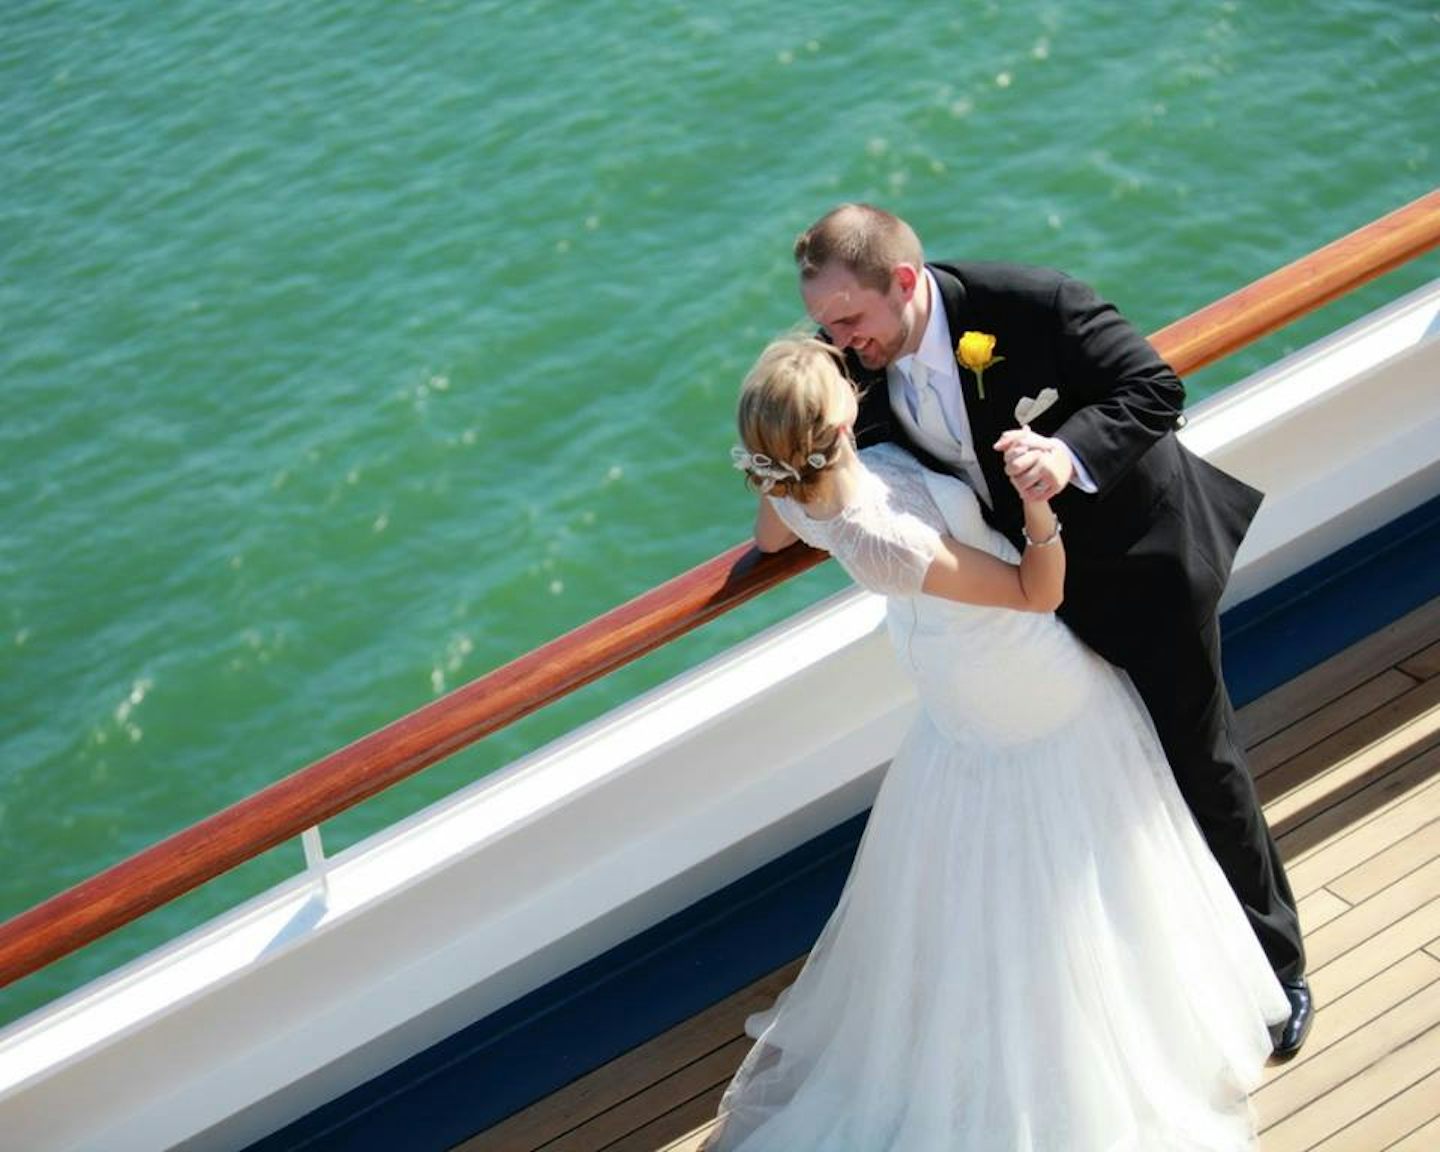 This is from our wedding on Carnival Freedom. We got married on embarkation day during on on-board ceremony with ~80 guests, of whom ~27 cruised with us for the 7-day sailing to Cozumel, Grand Cayman, and Ocho Rios. It was a dream wedding and an unforgettable week with family and friends! It was only too difficult to pick only one photo to submit for this!